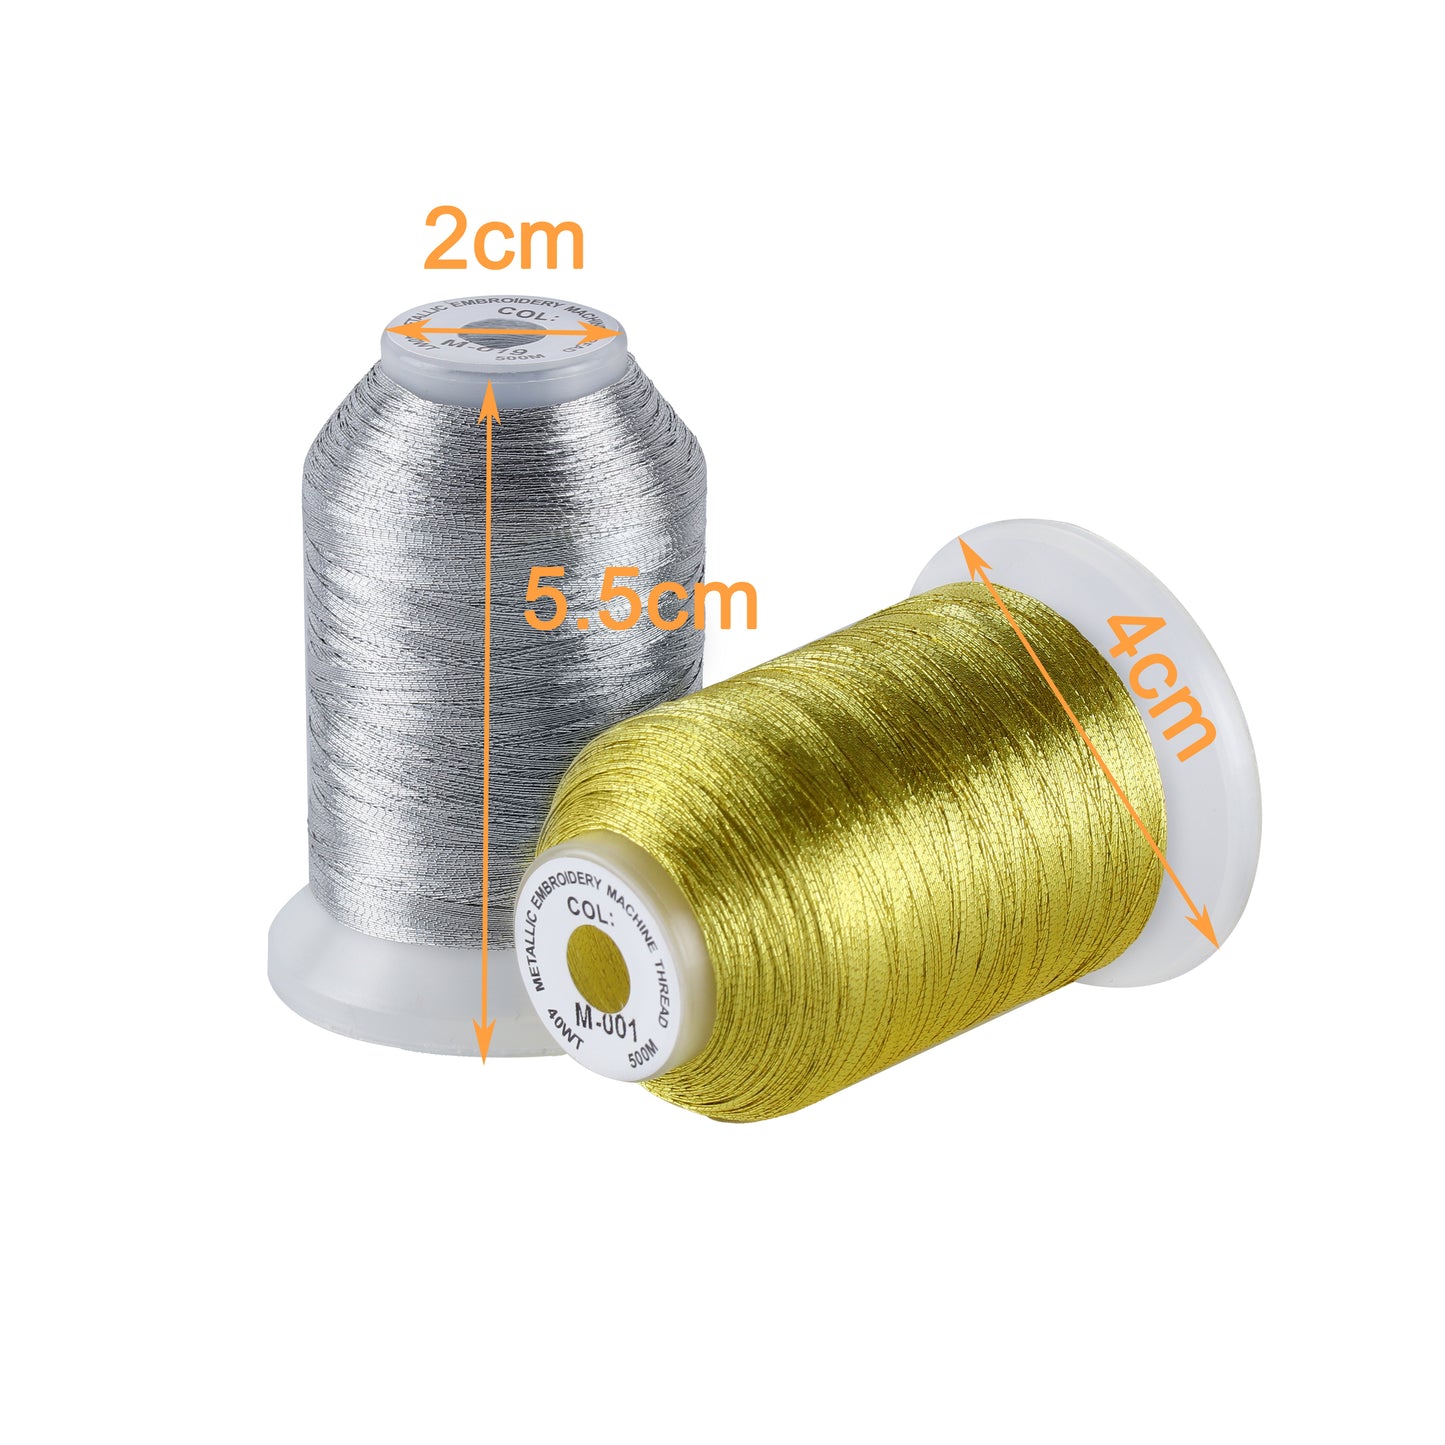 Simthread Embroidery Thread 5500 Yards Red 800, 2 Huge Spools 40wt  Polyester for Brother, Babylock, Janome, Singer, Pfaff, Husqvarna, Bernina  Machine